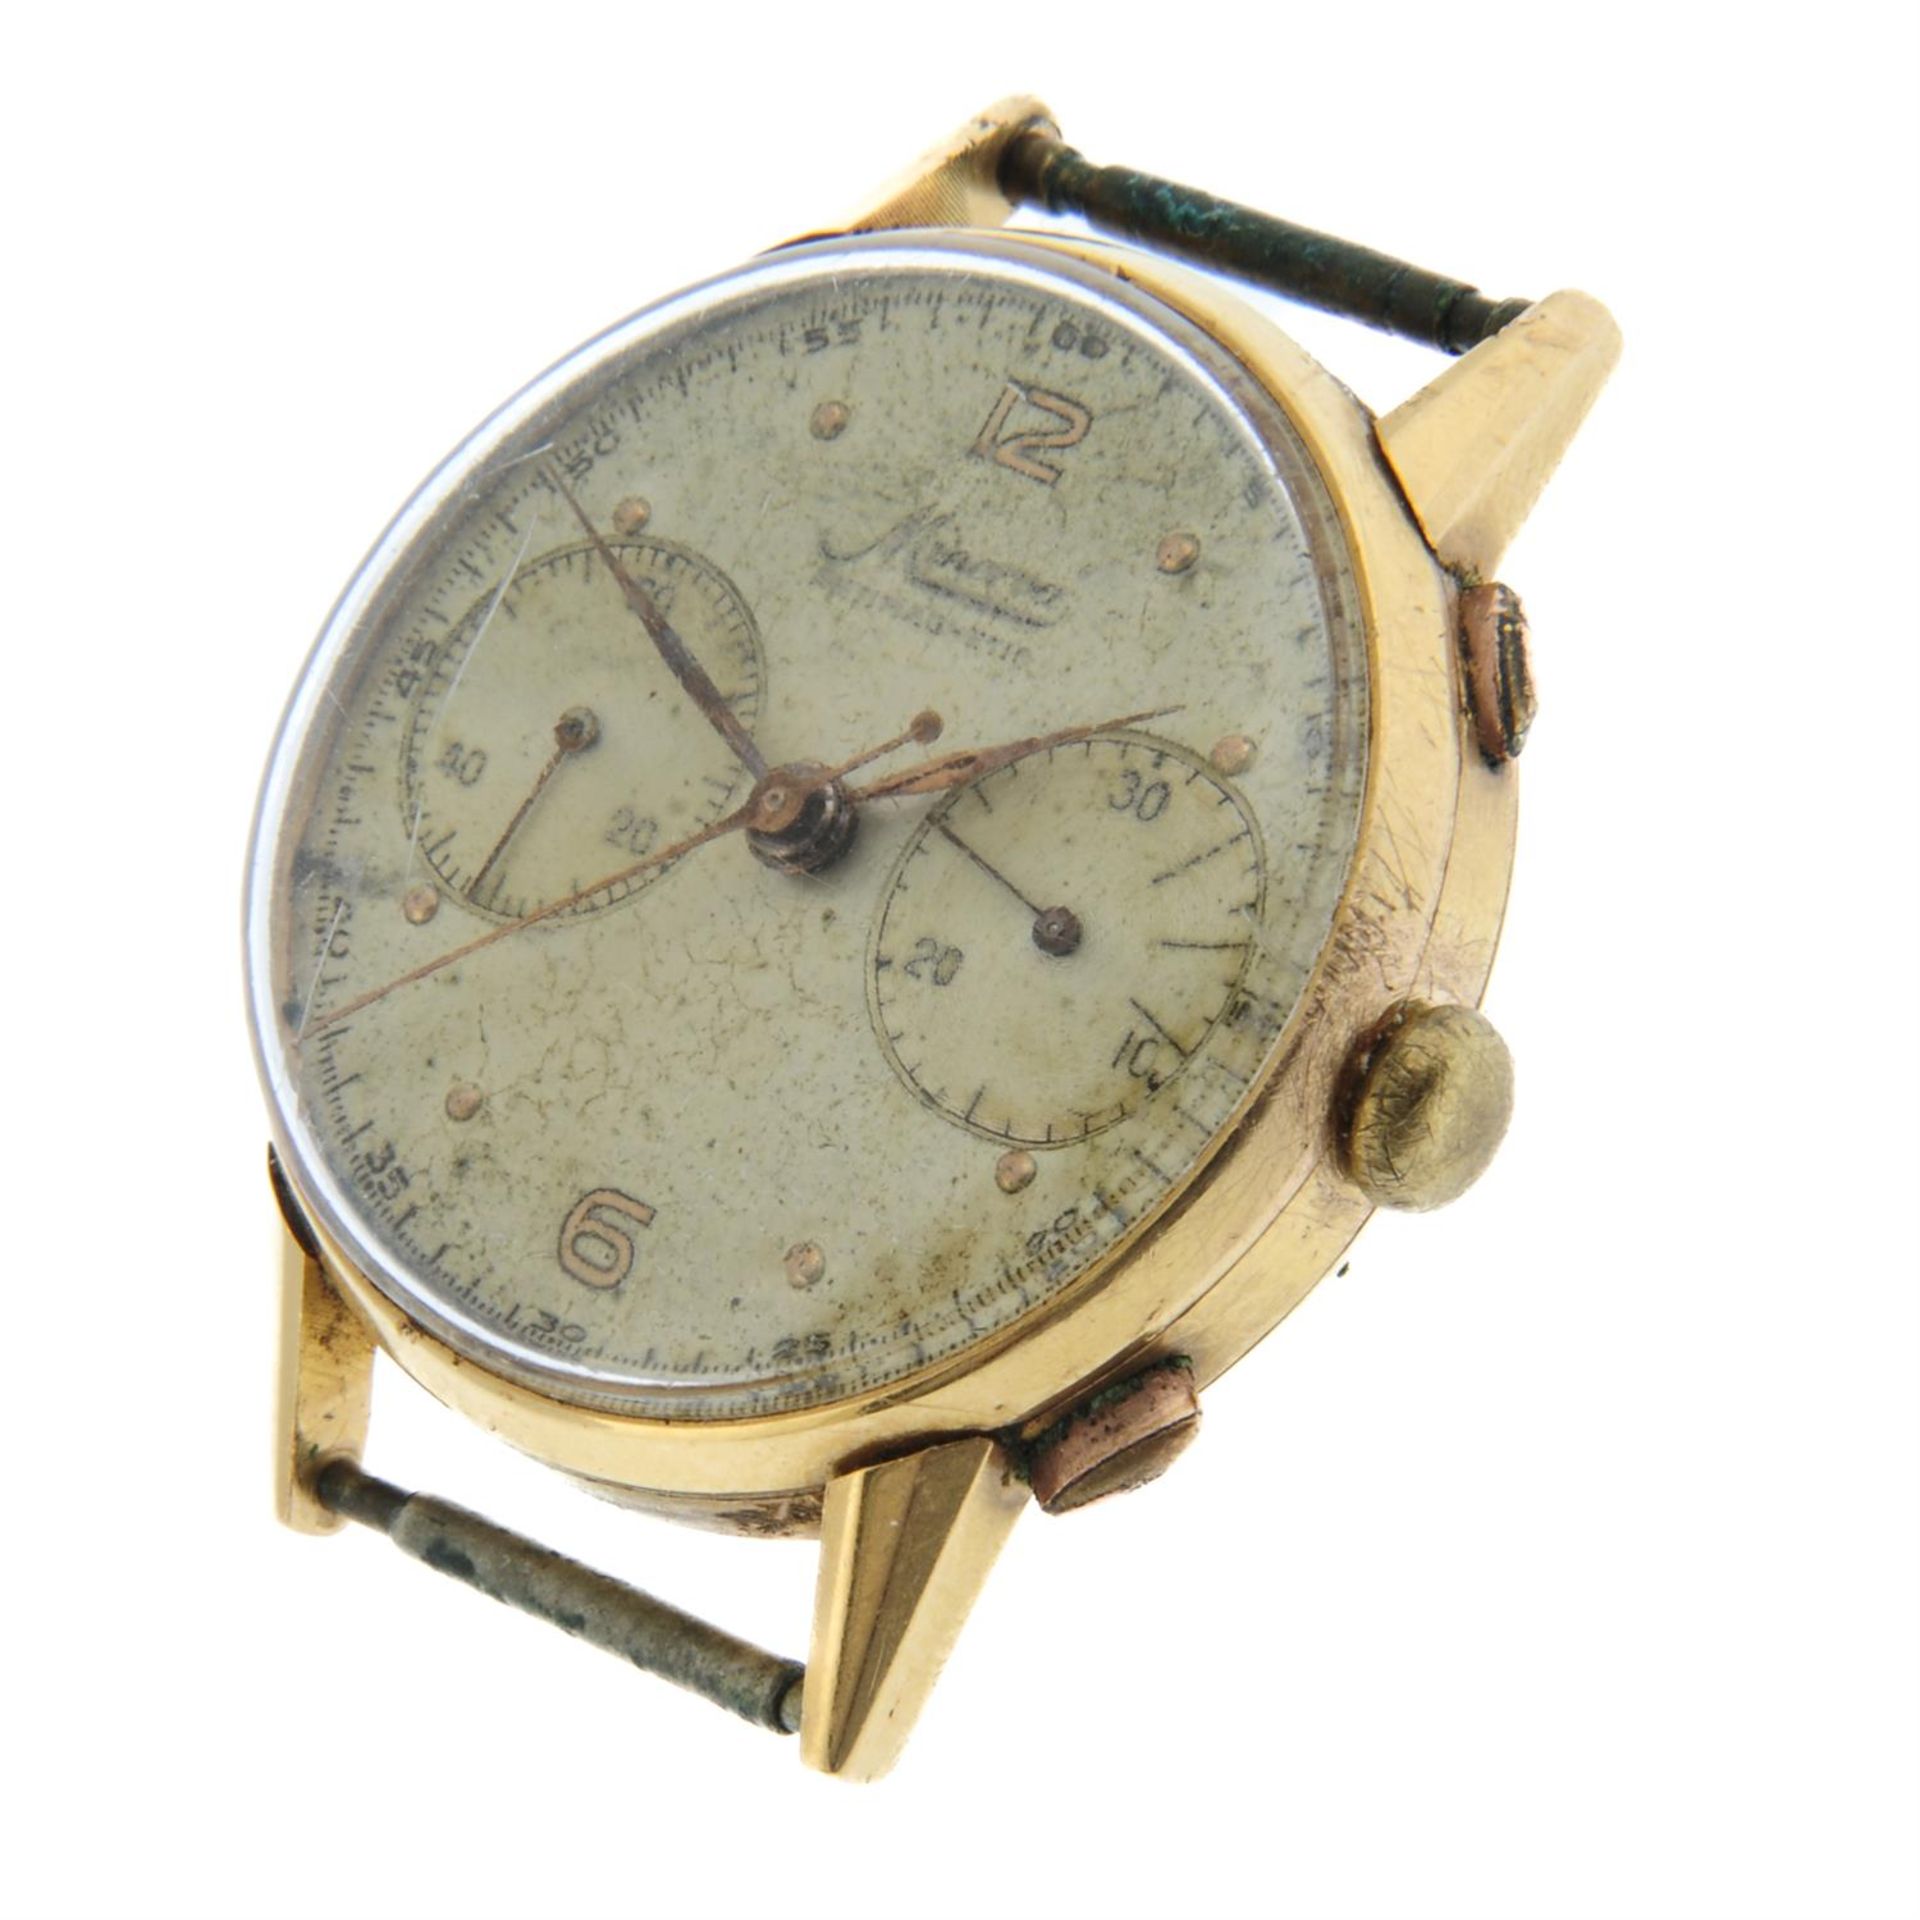 Minerva - a chronograph watch, 33.5mm. - Image 2 of 3